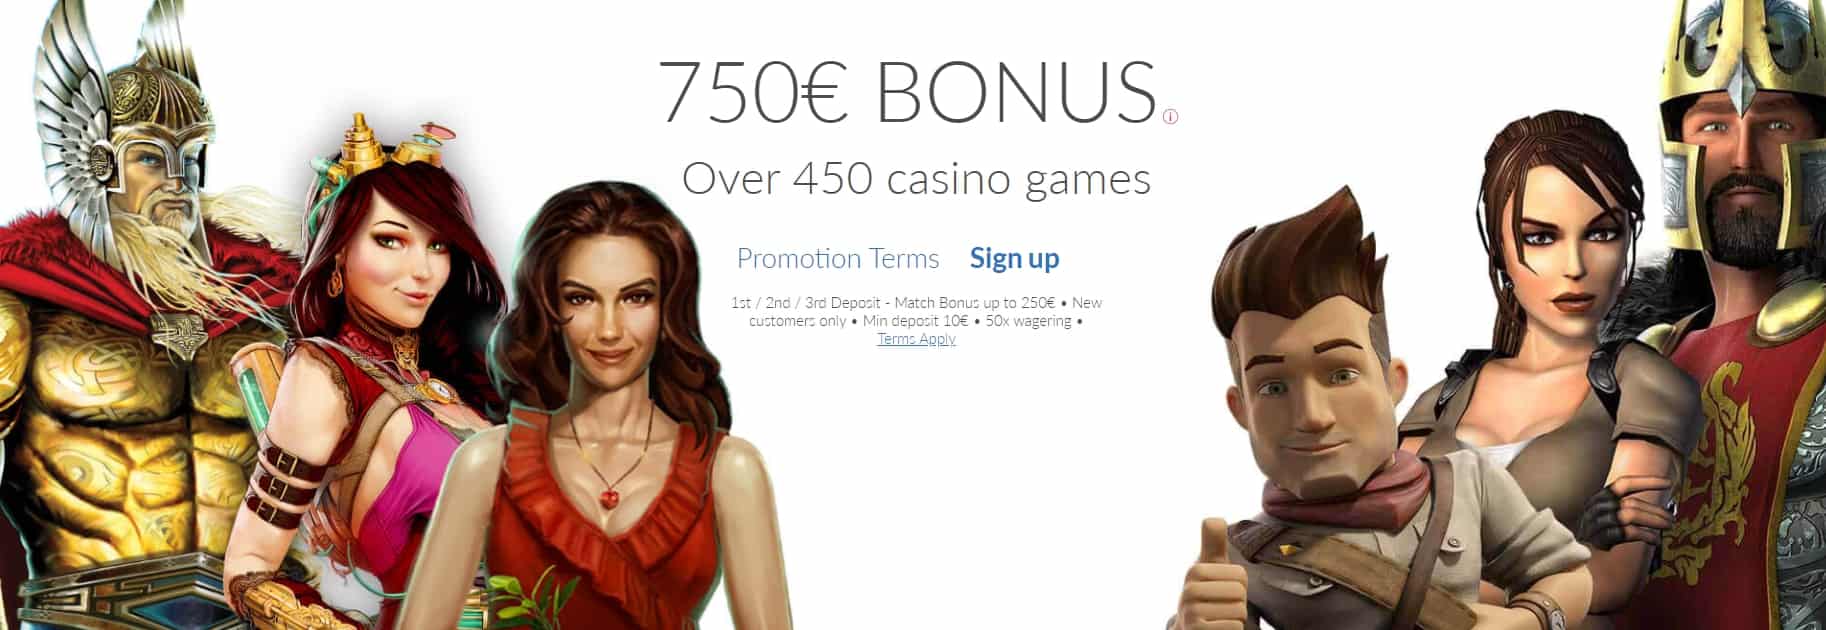 Ruby Fortune Casino 2020 Review Use Paysafecard In Casino Rubyfortune